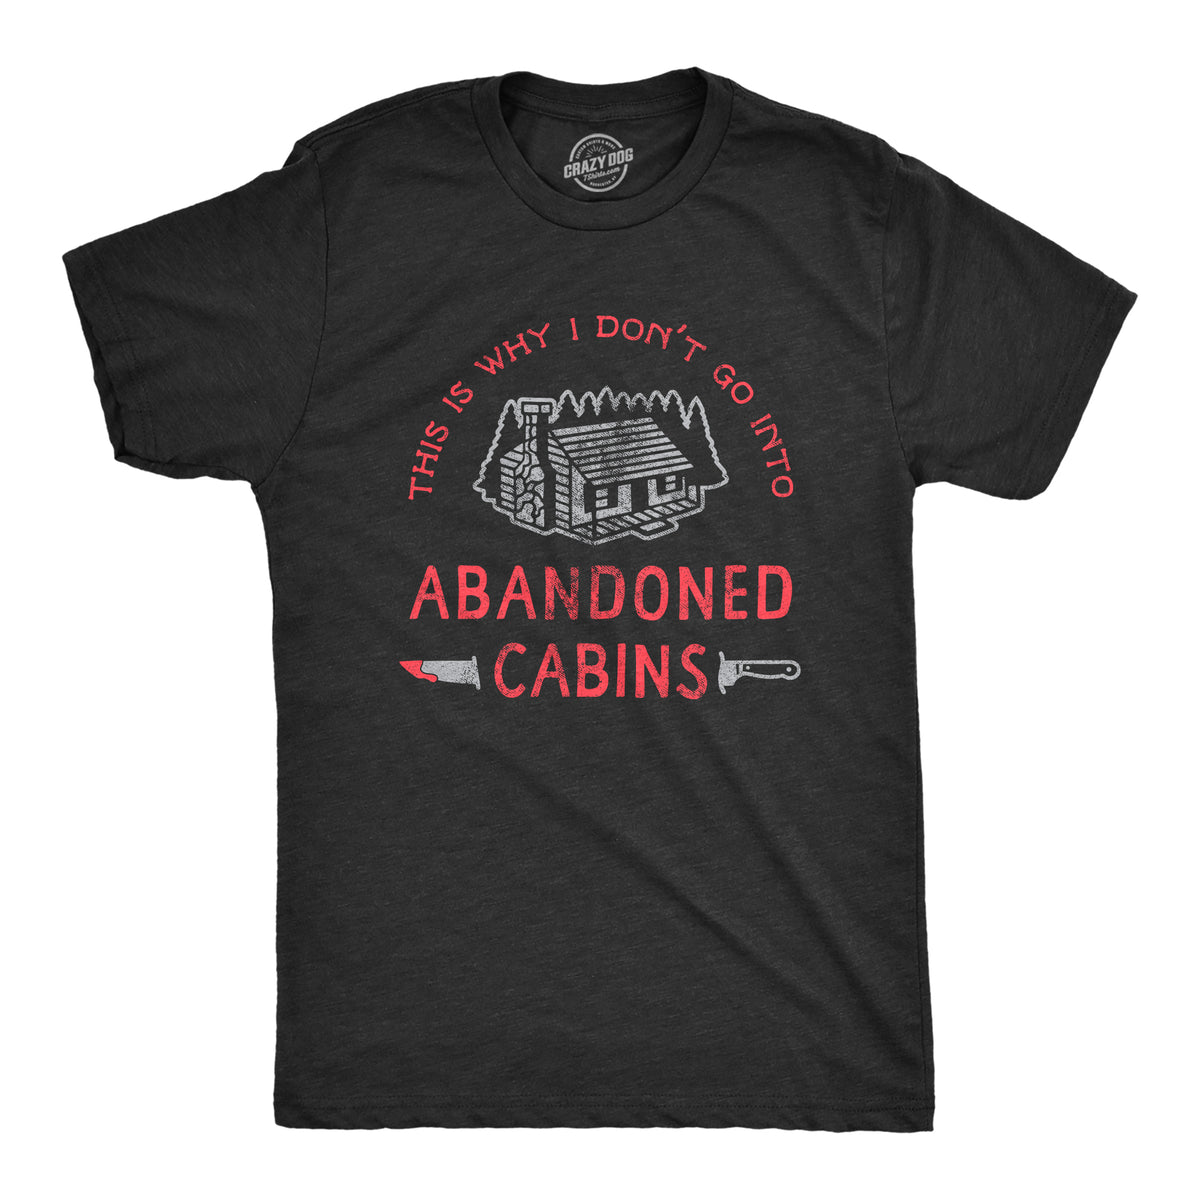 Funny Heather Black Why I Dont Go Into Abandoned Cabins Mens T Shirt Nerdy Halloween TV &amp; Movies Sarcastic Tee